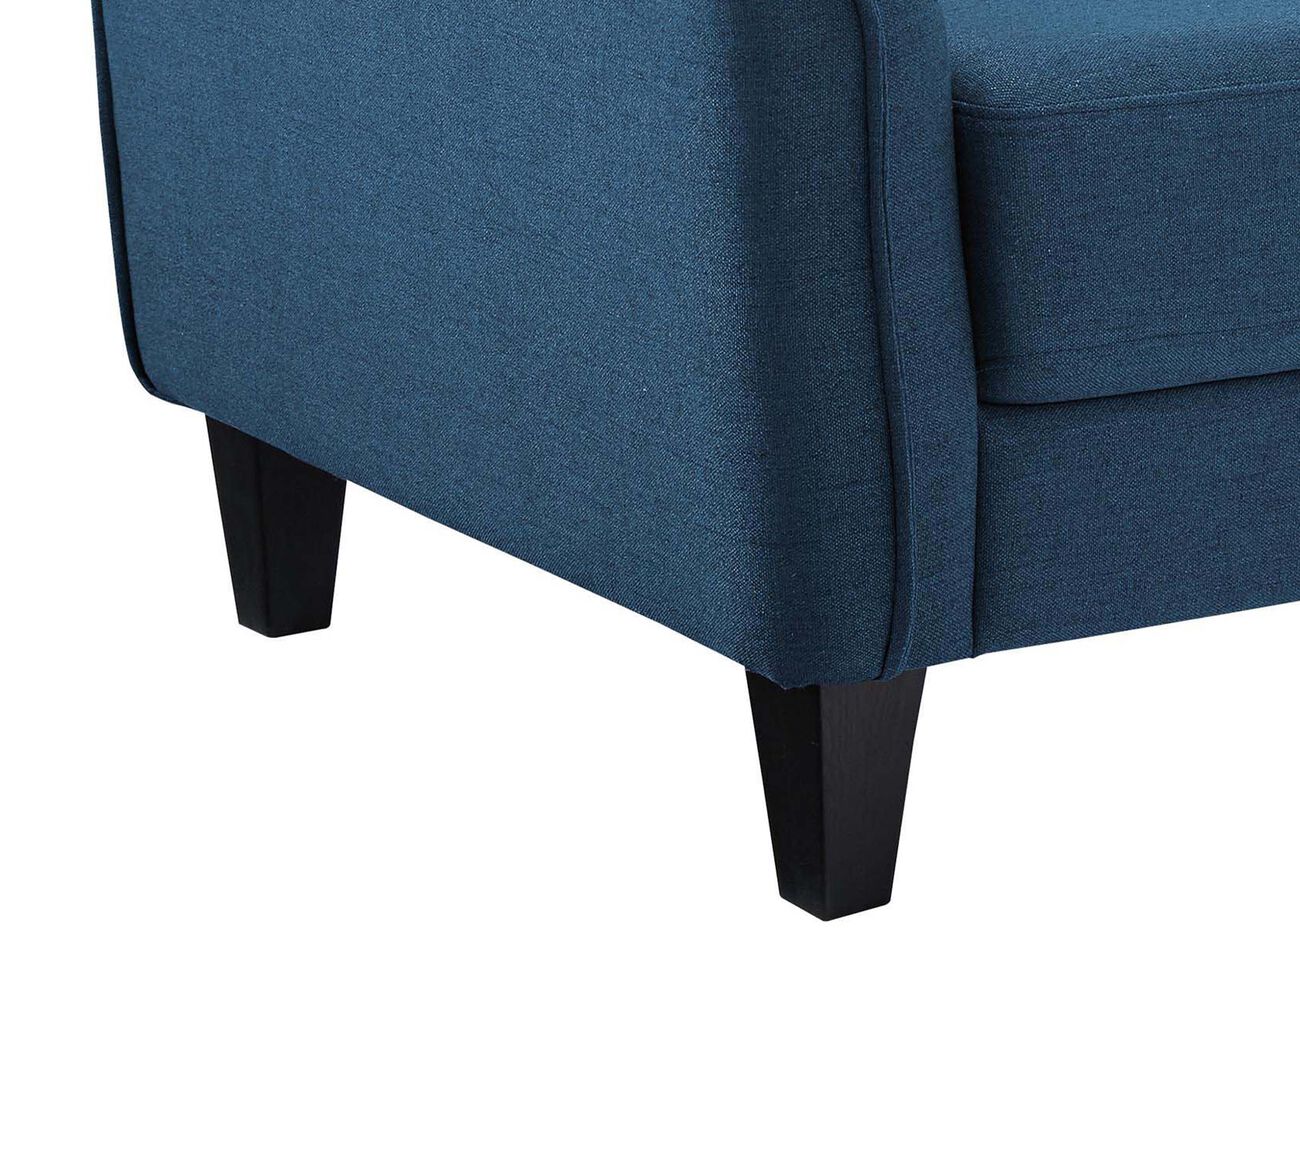 Fabric Upholstered Wooden Chair with Corner Blocked Frame, Blue